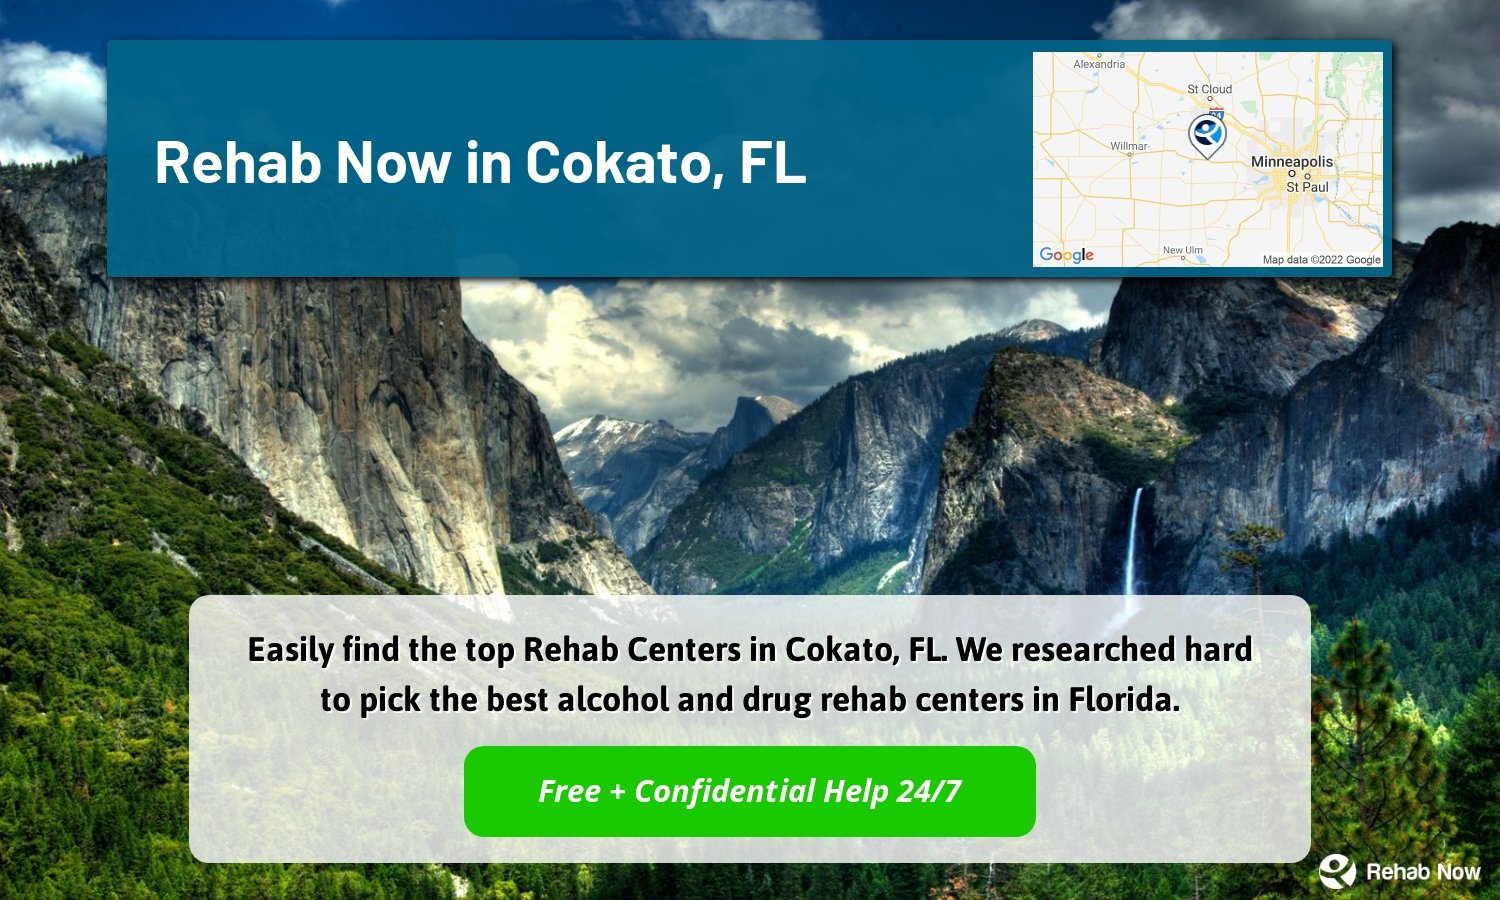 Easily find the top Rehab Centers in Cokato, FL. We researched hard to pick the best alcohol and drug rehab centers in Florida.